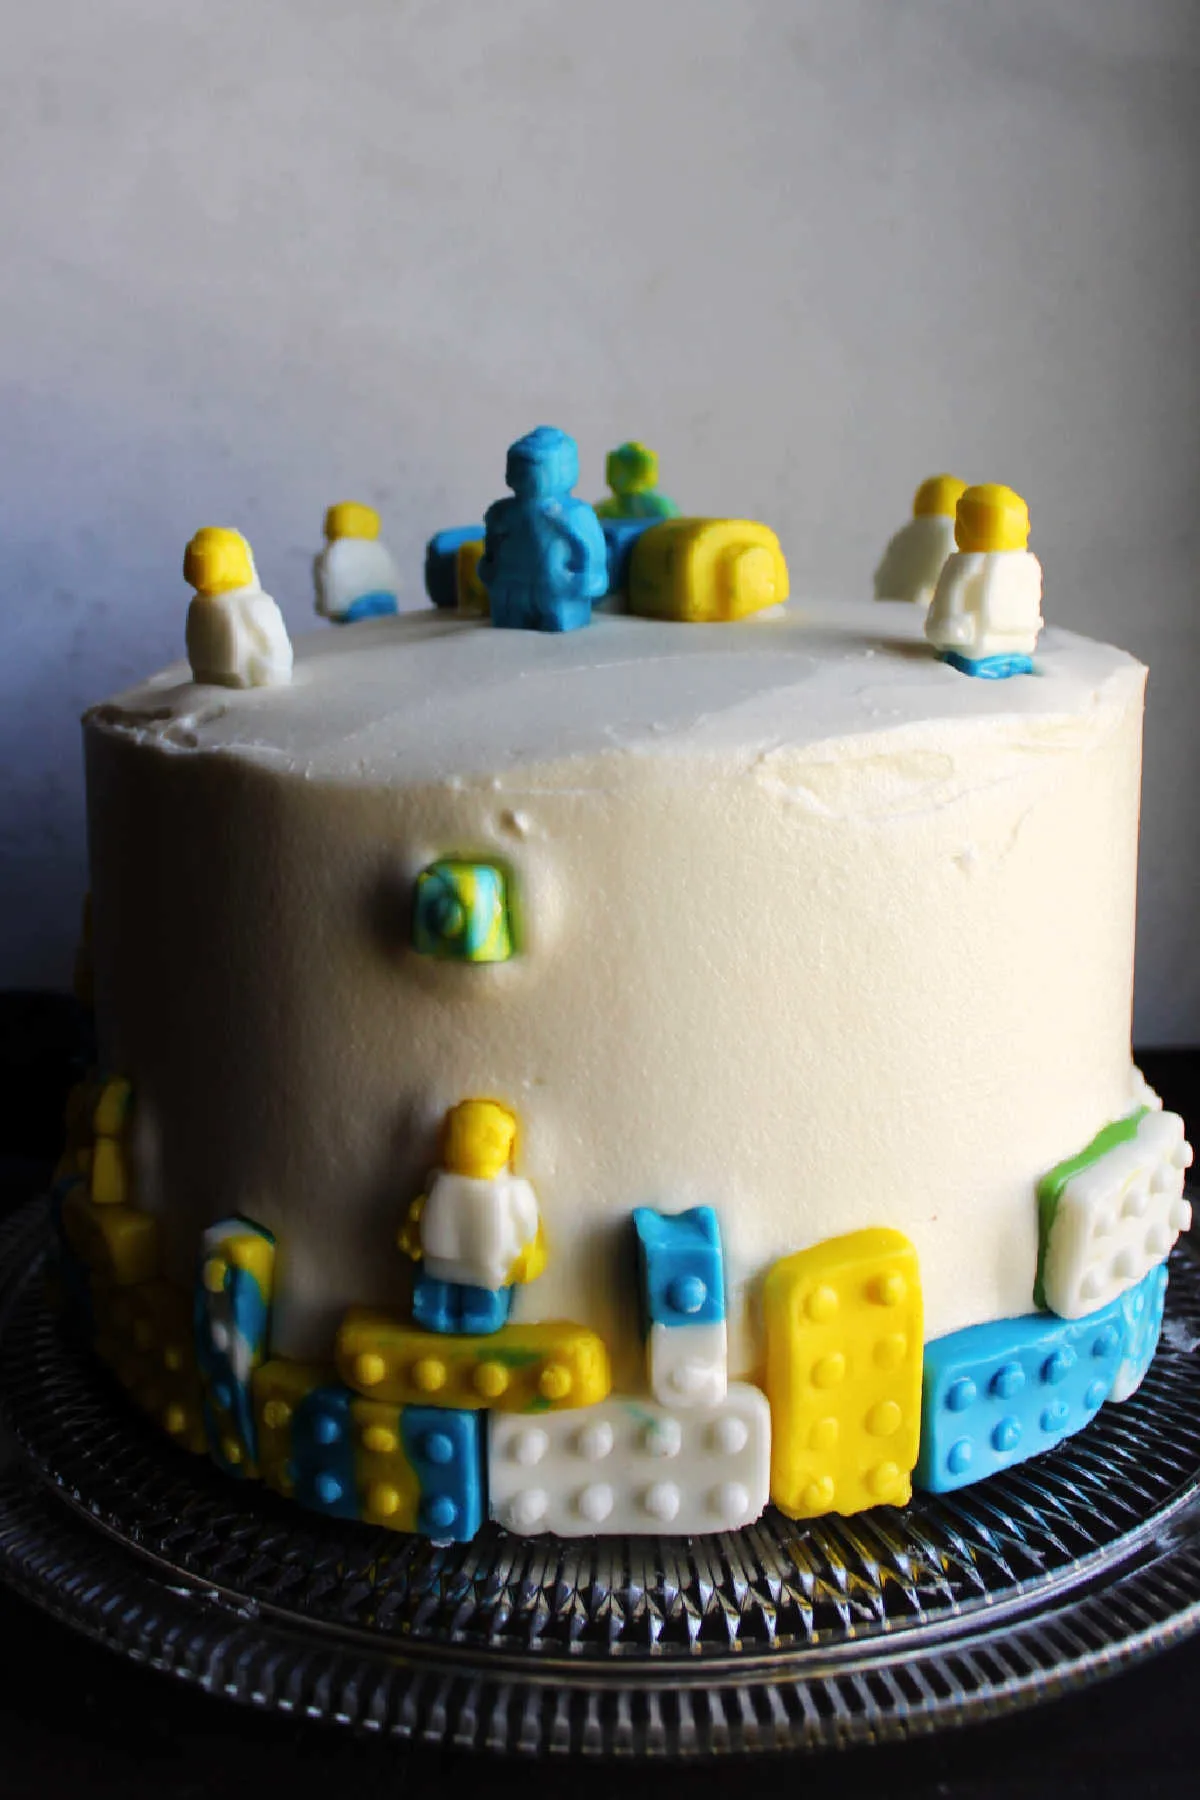 Layer cake frosted with white marshmallow buttercream decorated with fondant legos and lego guys.